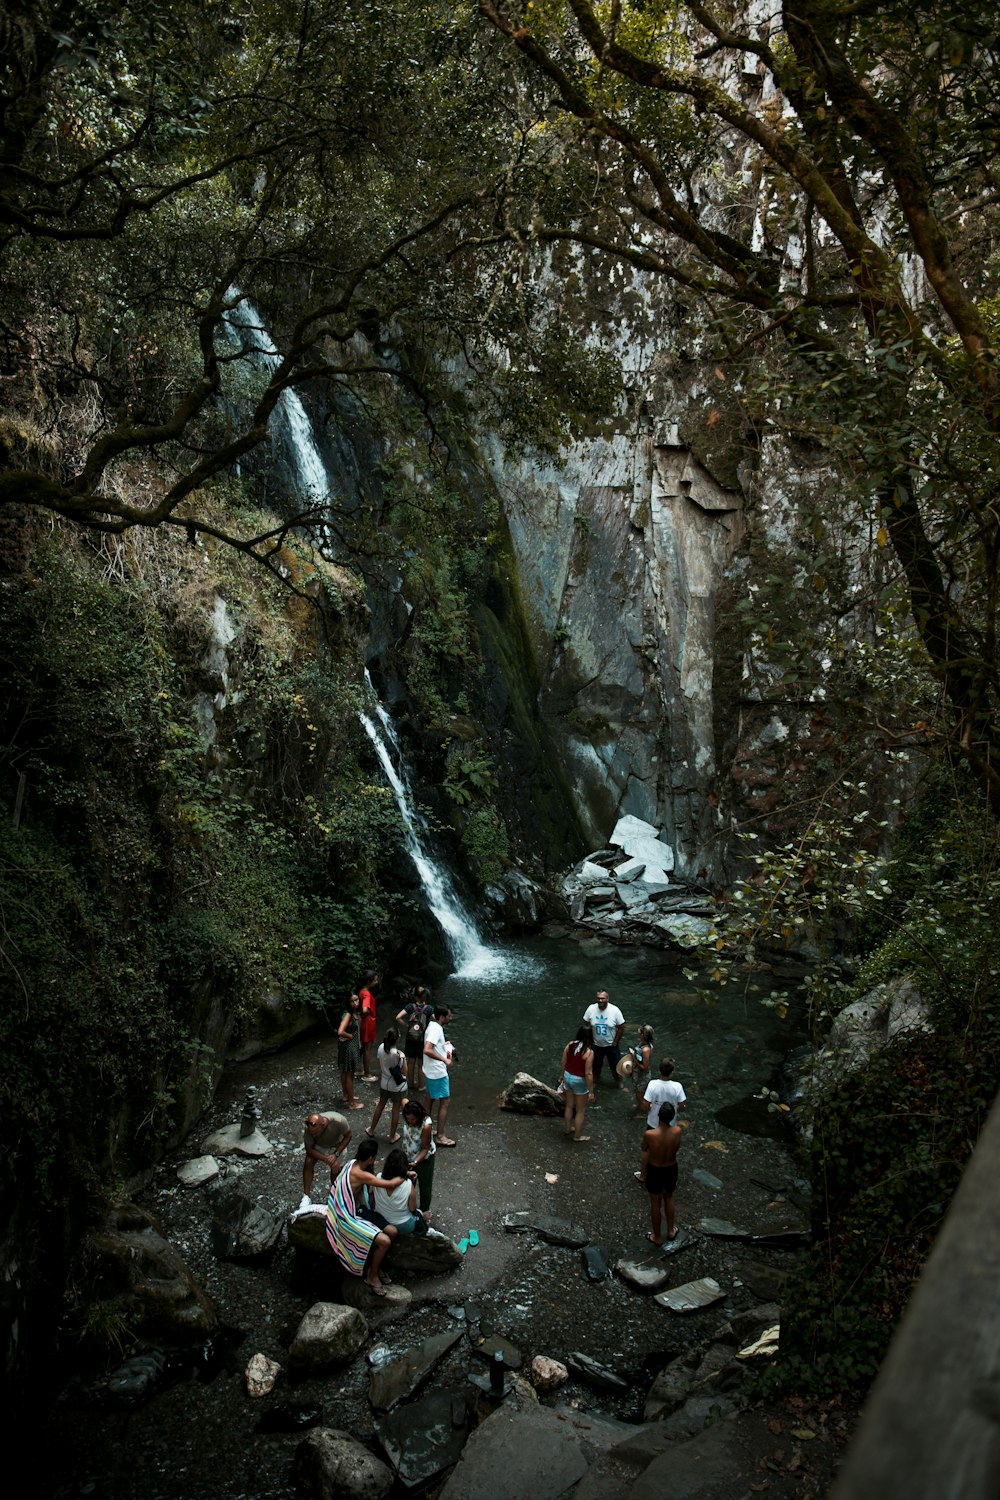 group of people on water falls